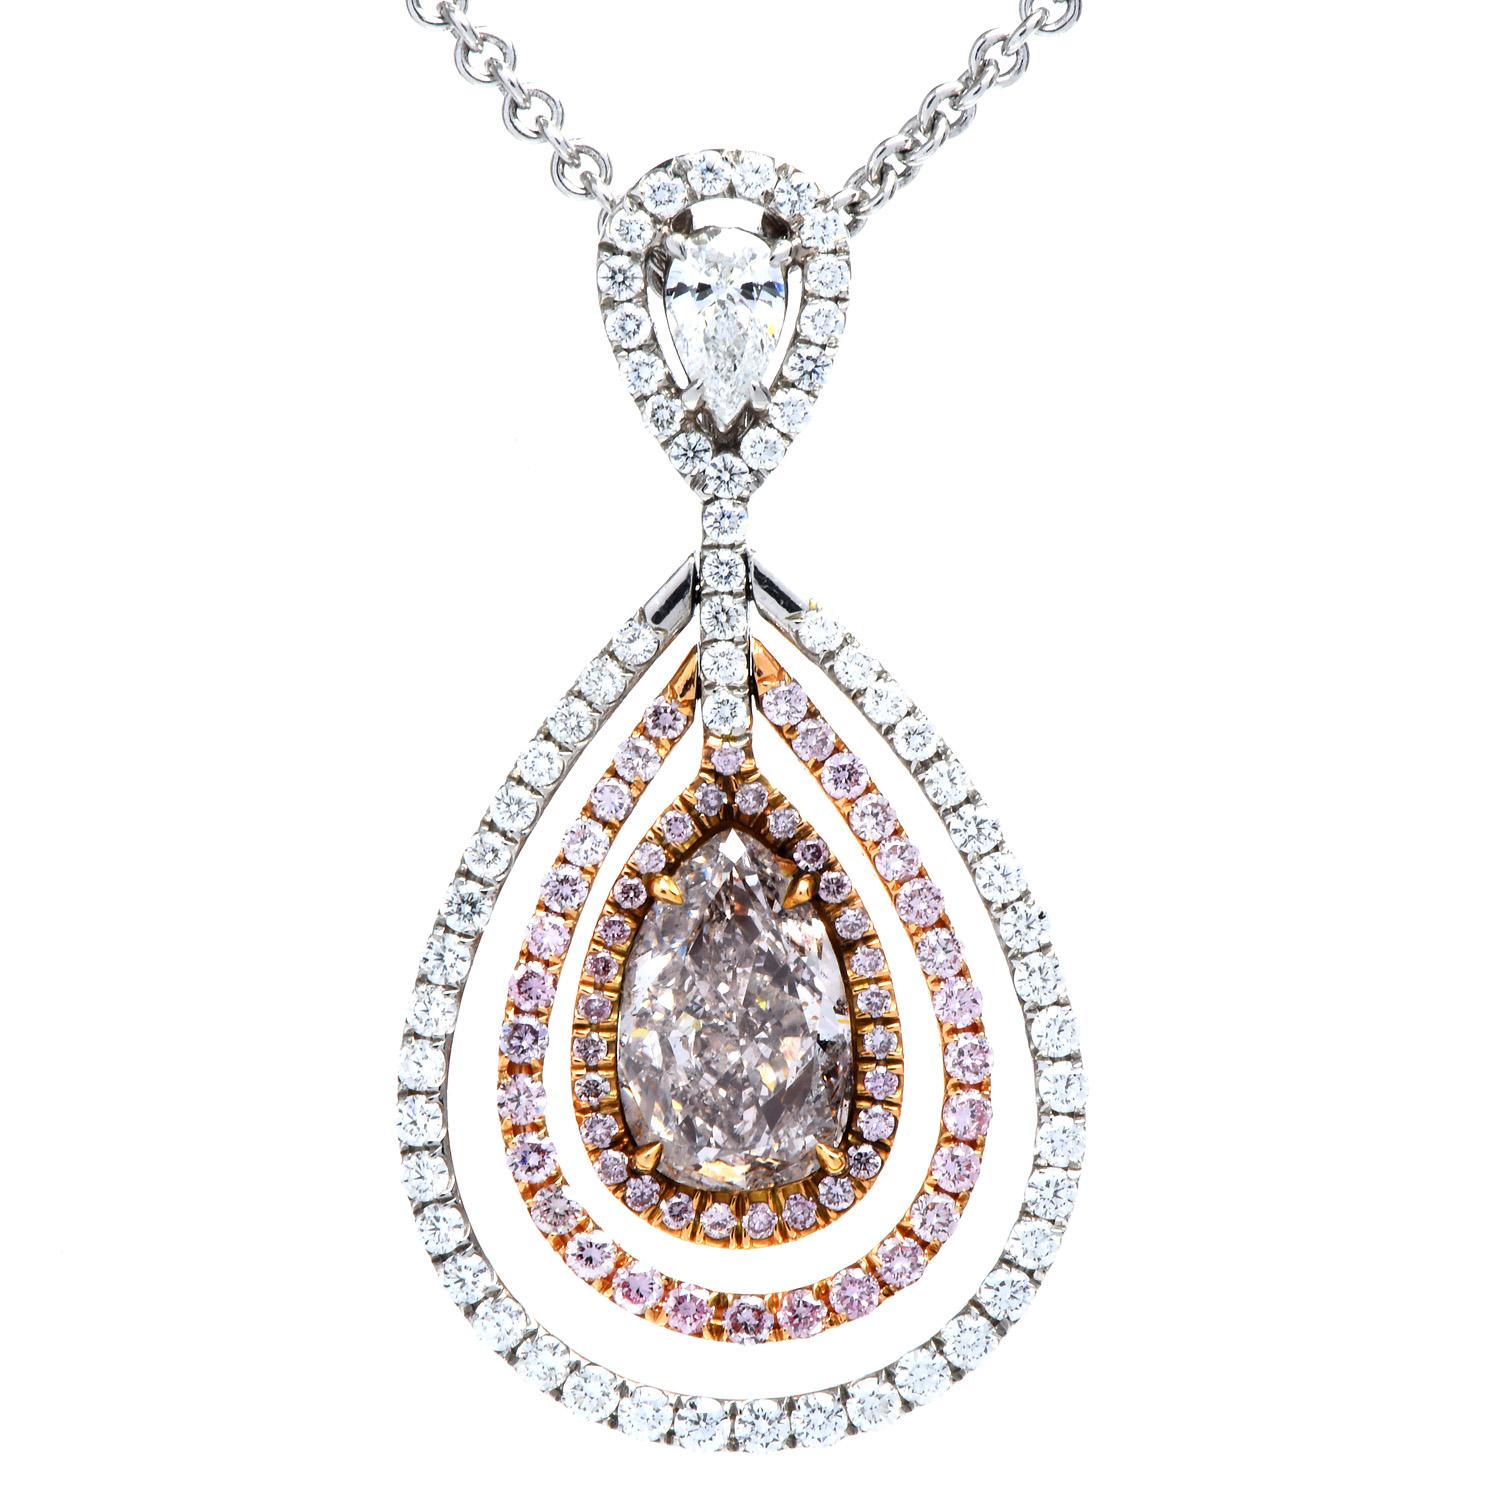 This stunning natural Fancy Natural light  Pink diamond pendant necklace is crafted in solid platinum and 18kWhite Gold.

It is centered by a GIA Certified pear-shaped natural Fancy light pink diamond, weighing 1.56 carats with SI2 Clarity, set in